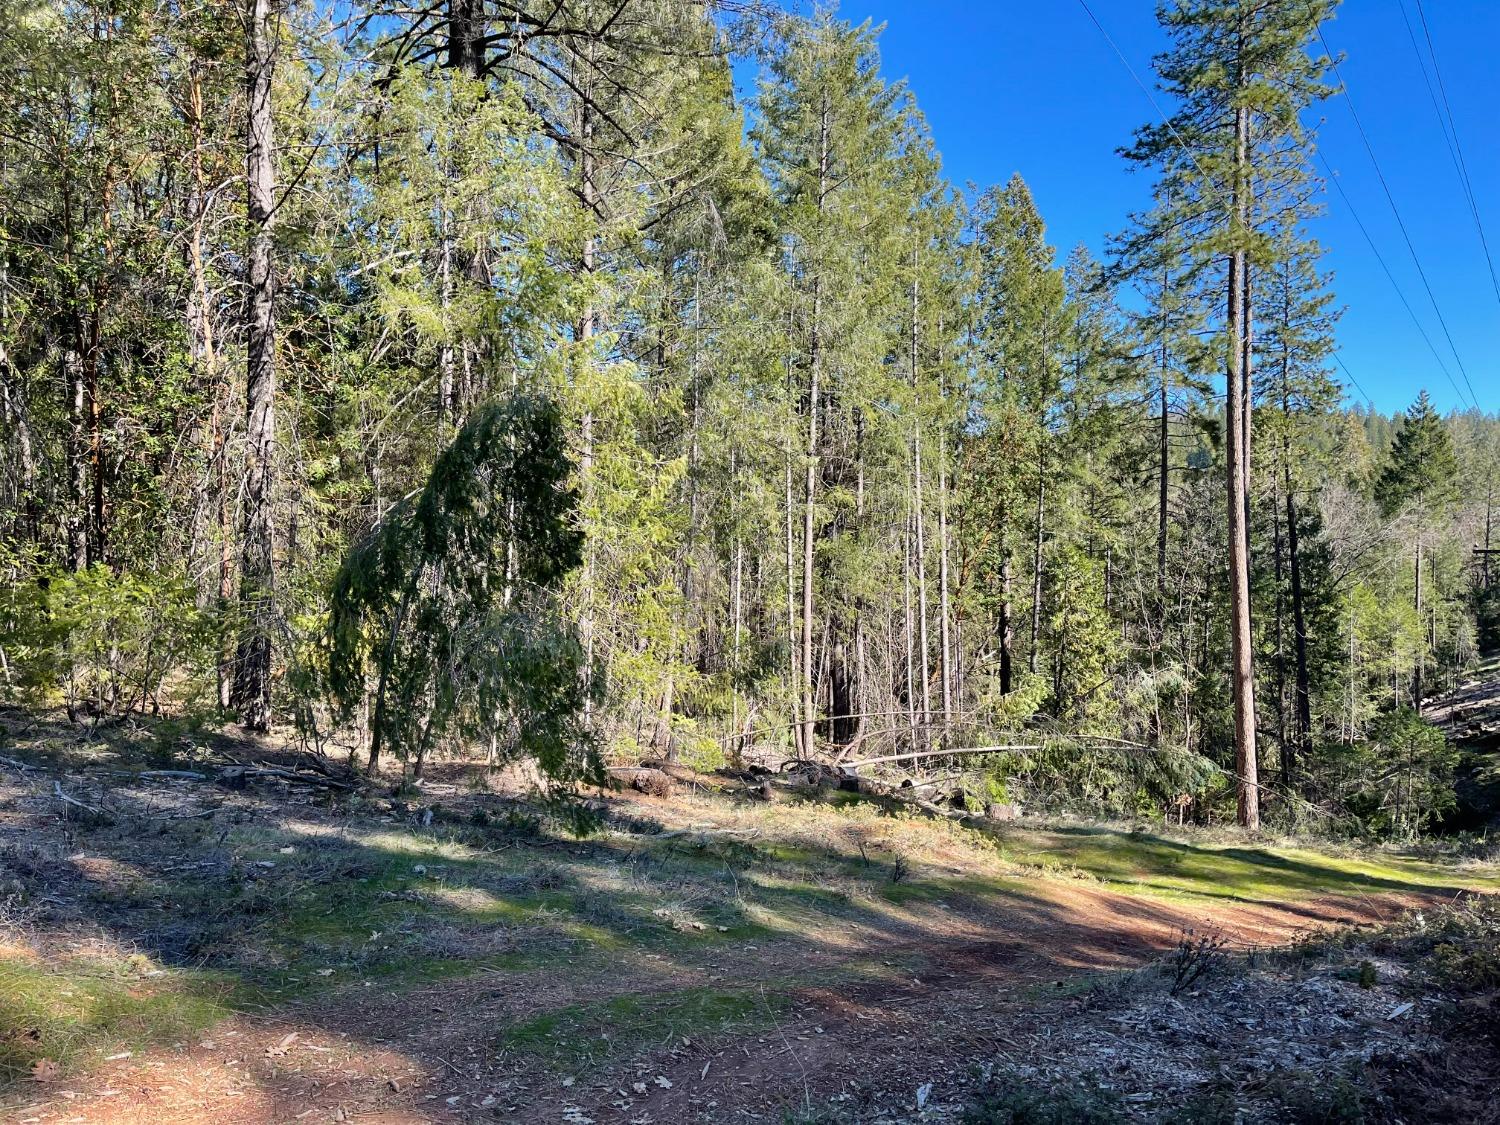 Priced reduced! Ready to build your dream ranch retreat? Become an organic garden farm? opportunity for so uch more. Great location, only 20 minutes to Auburn and 40 Mins to Roseville! This Lovely and beautiful, rolling 20 acres with many trees, located about half a mile down Pine Mountain Road is private road shared with your neighbors. Rare find to have 20 acres of useable land south of Foresthill. A variety of terrain: rolling, level, gently sloping, lower ridge view and valley ridge views. Close to hiking trails and riding trails. No trespassing by or through the gates. Electricity, phone, internet hook ups nearby. good area for wells. Great property, will look at offers. Need to be accompany for access. Further property information available upon request.